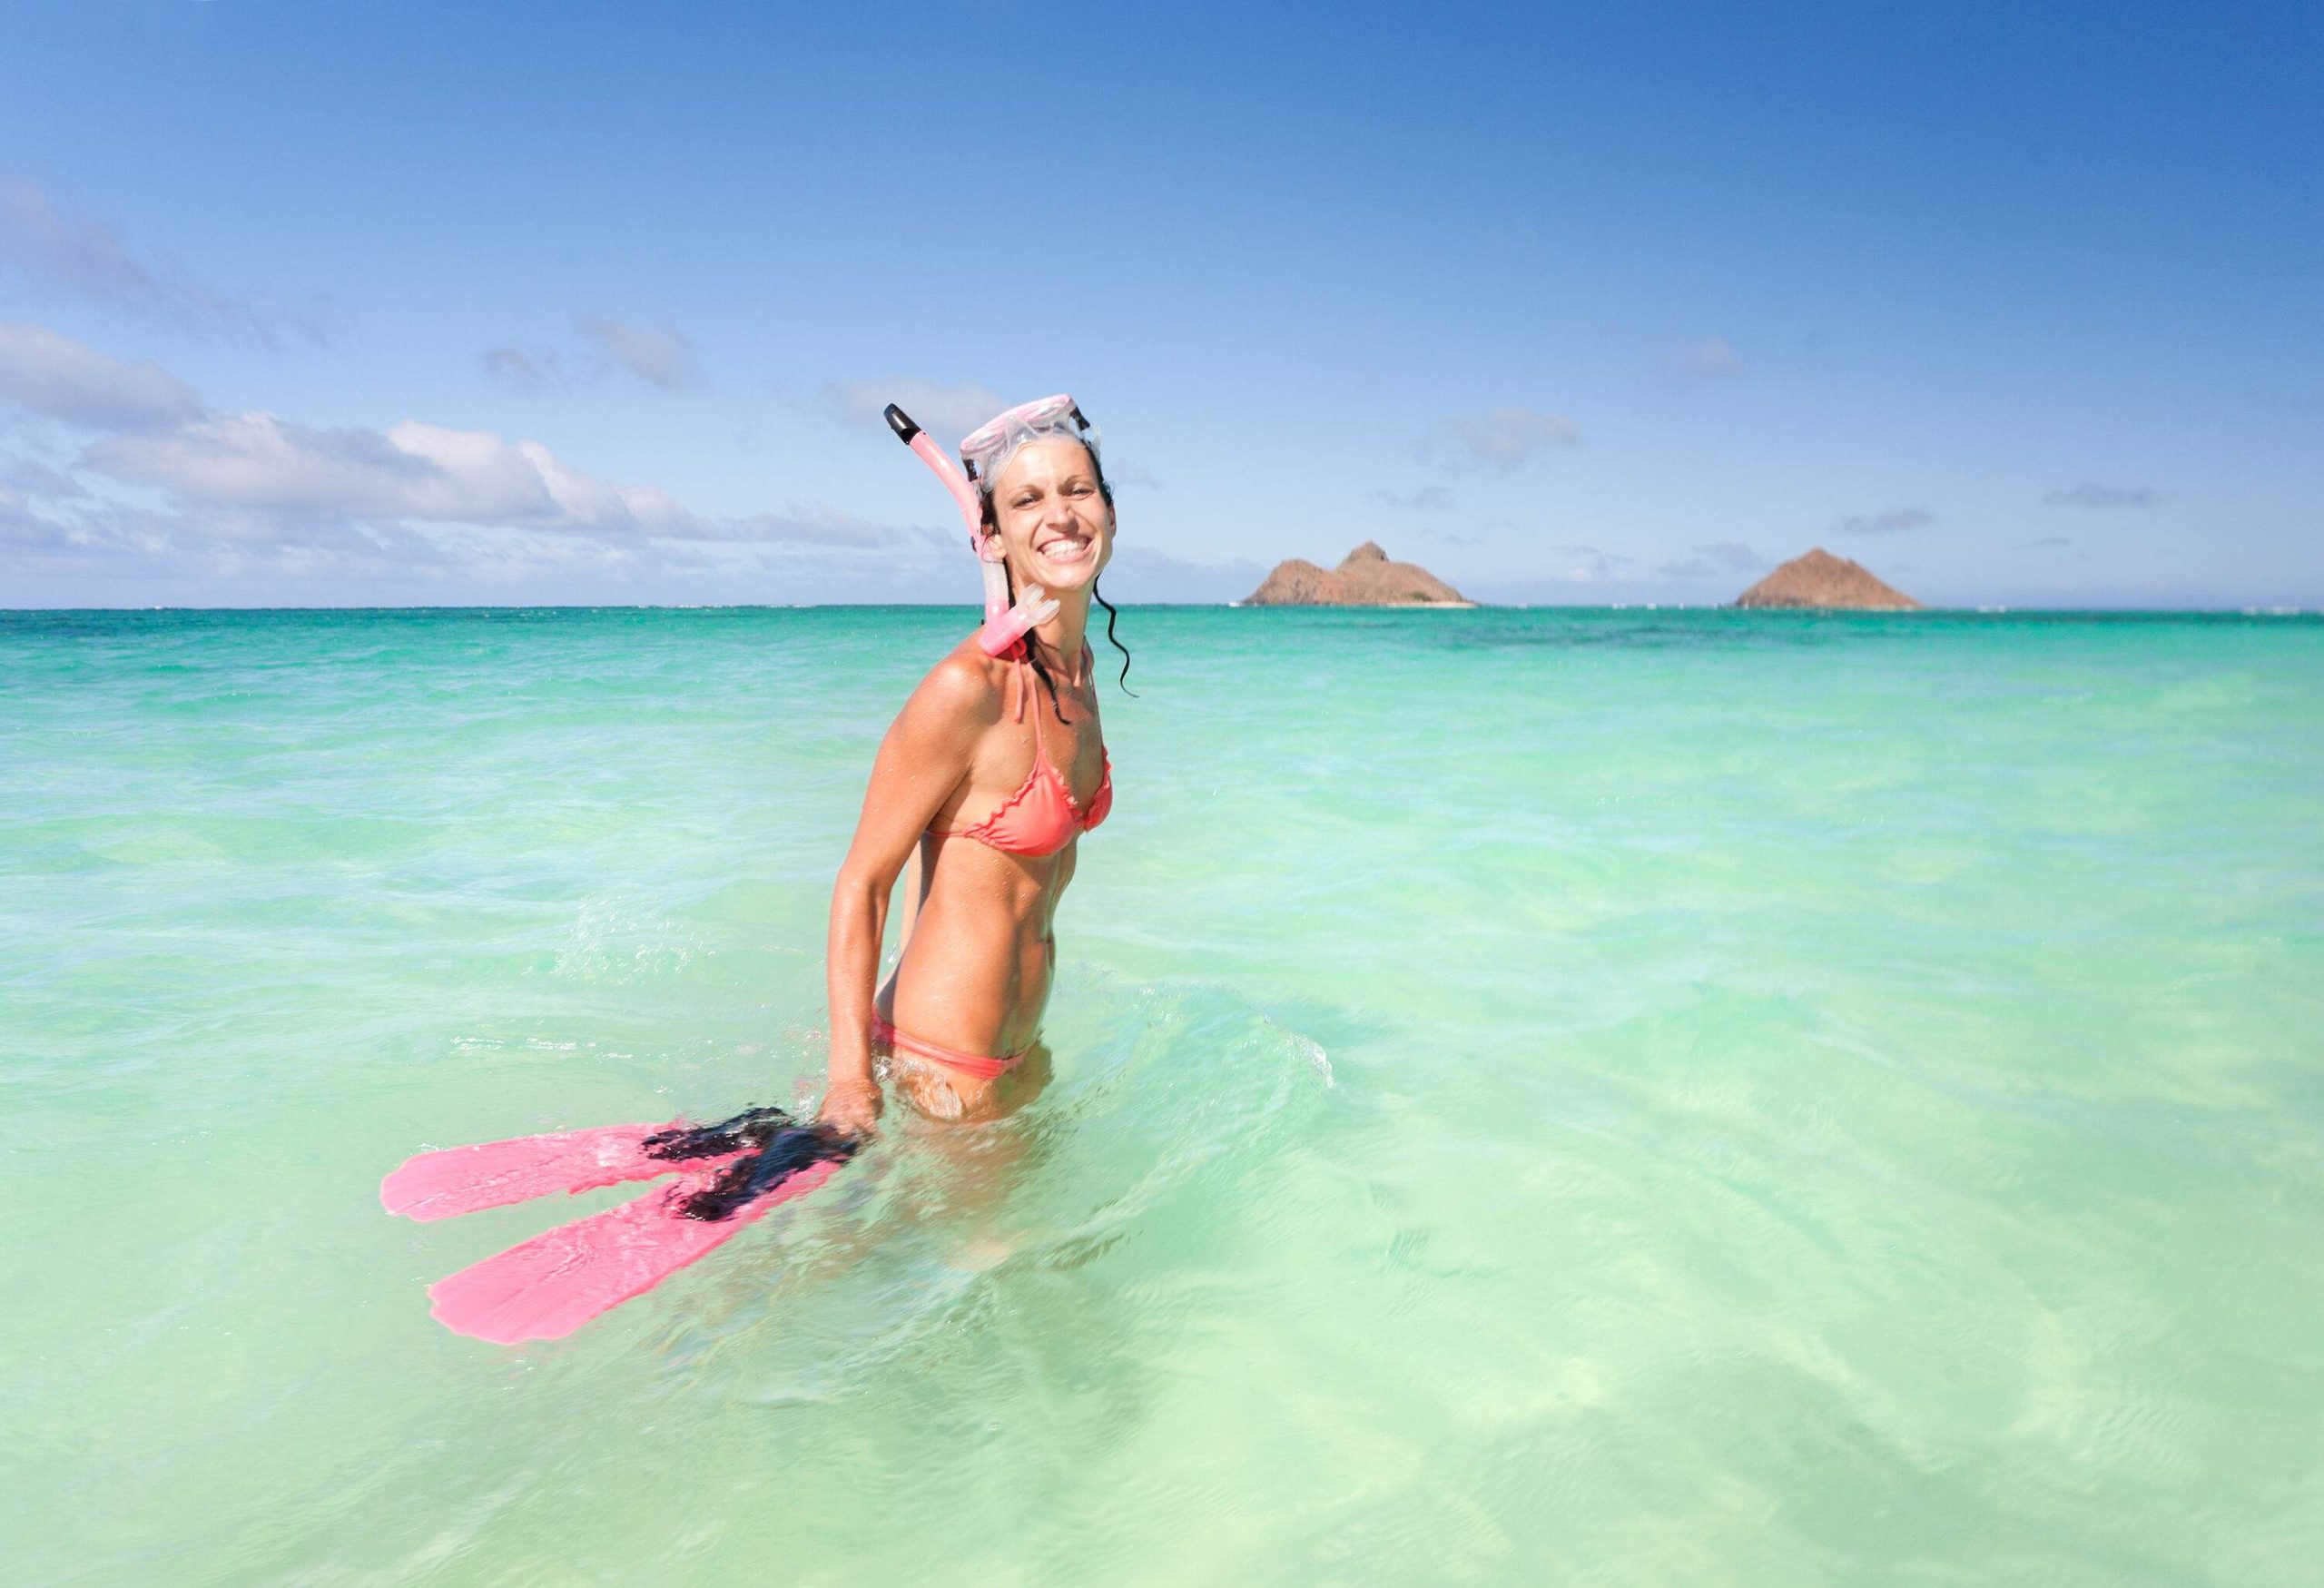 A woman in a bikini with her snorkel gear stands on the sea's shallow waters with two protruding rock mountains in the background.